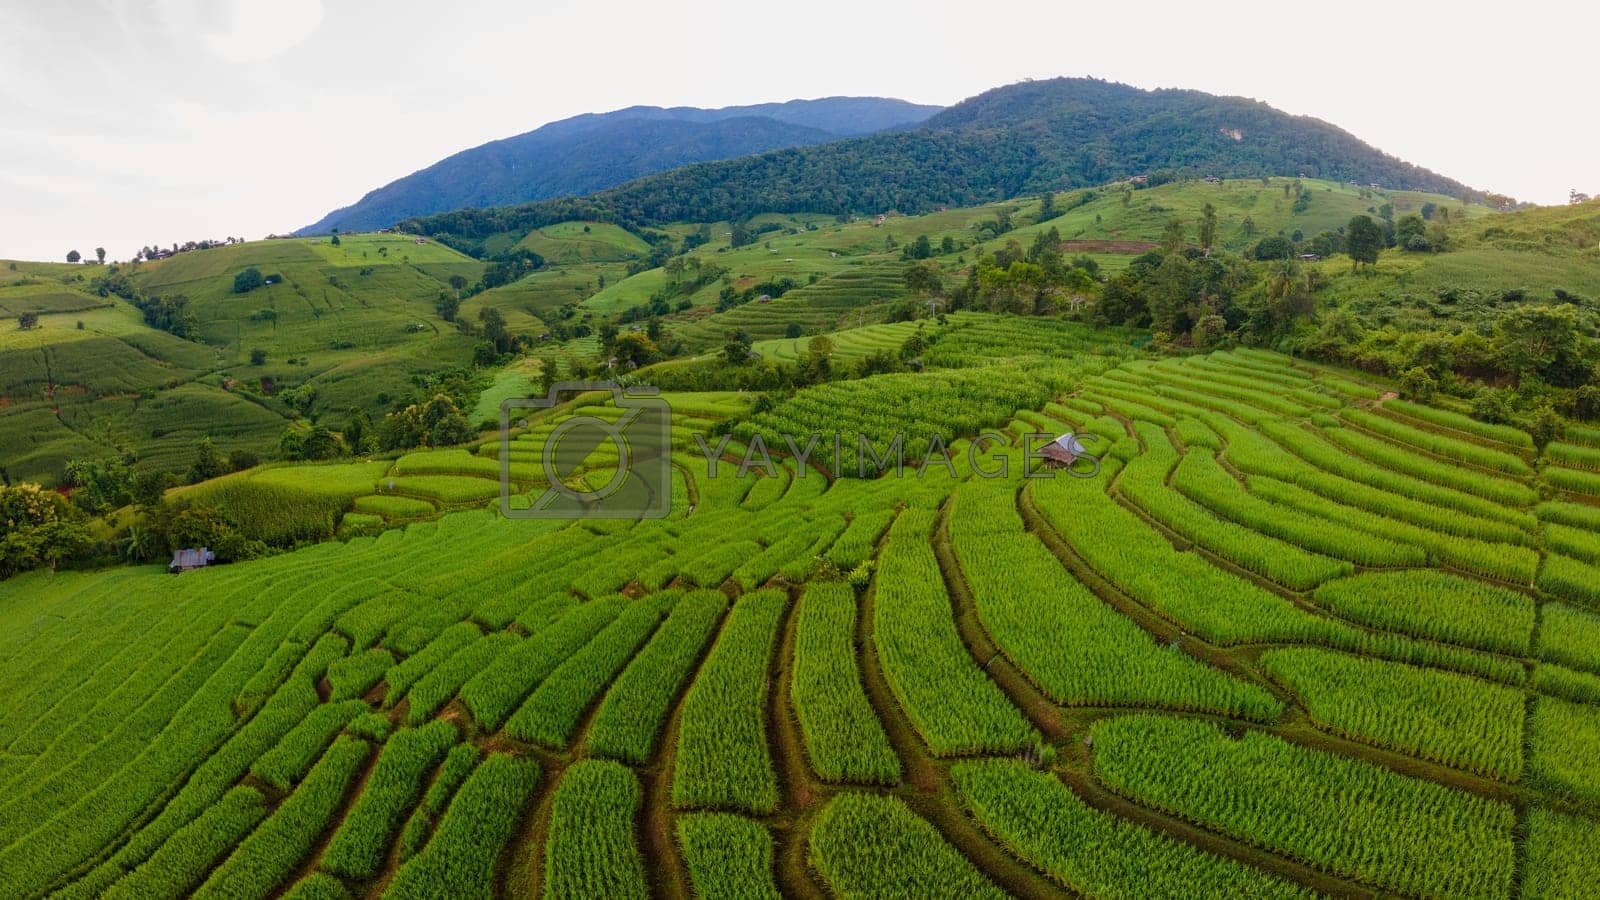 Royalty free image of view of the Terraced Rice Field in Chiangmai, Thailand by fokkebok